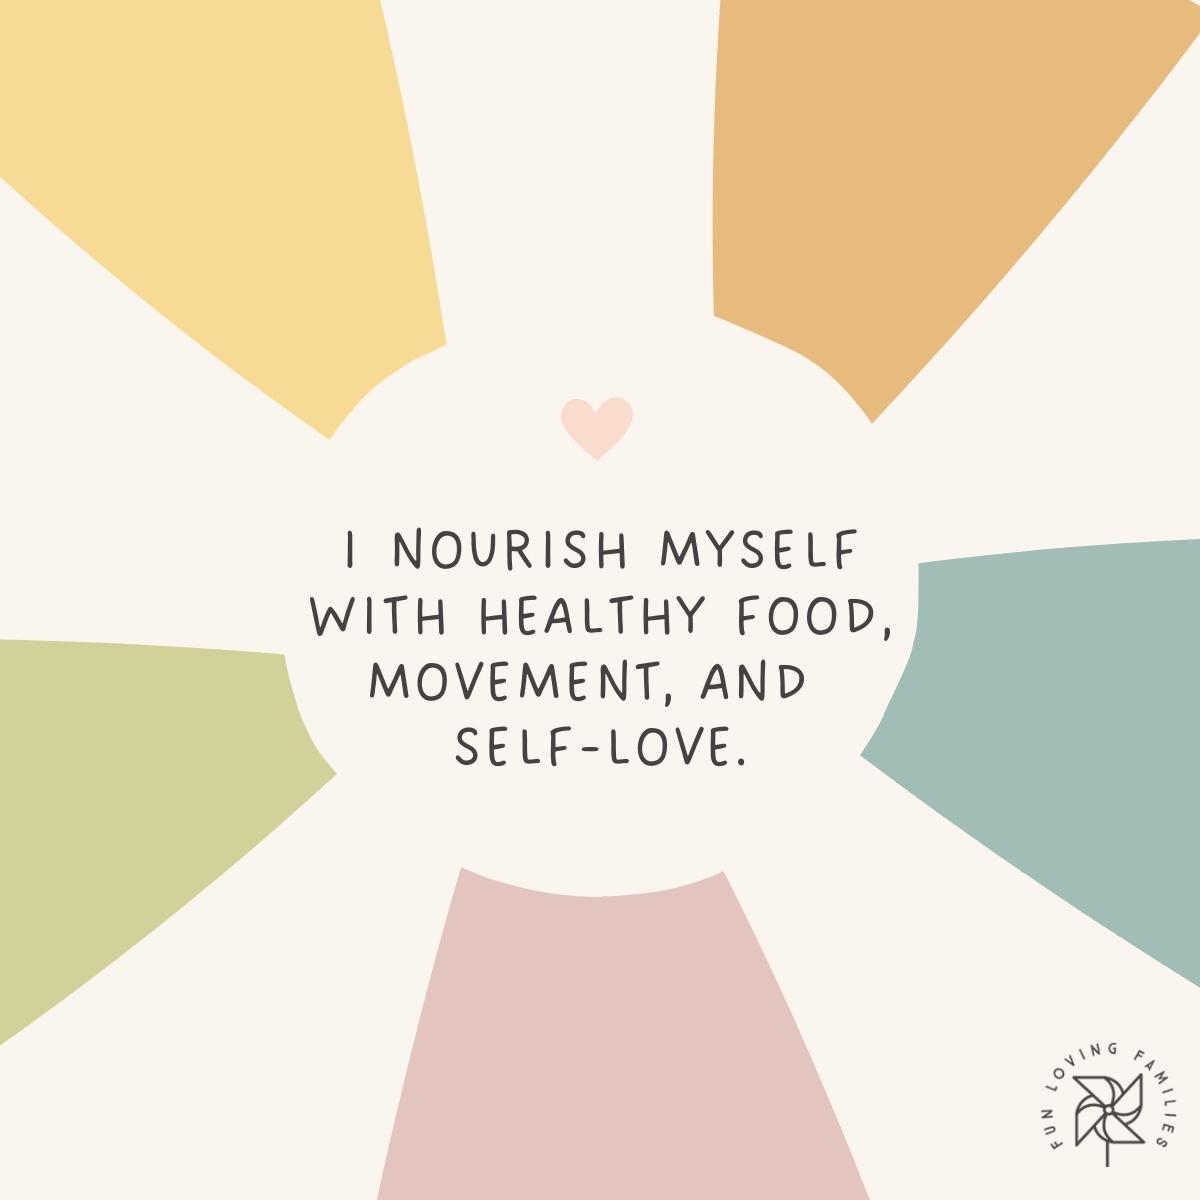 I nourish myself with healthy food, movement, and self-love affirmation